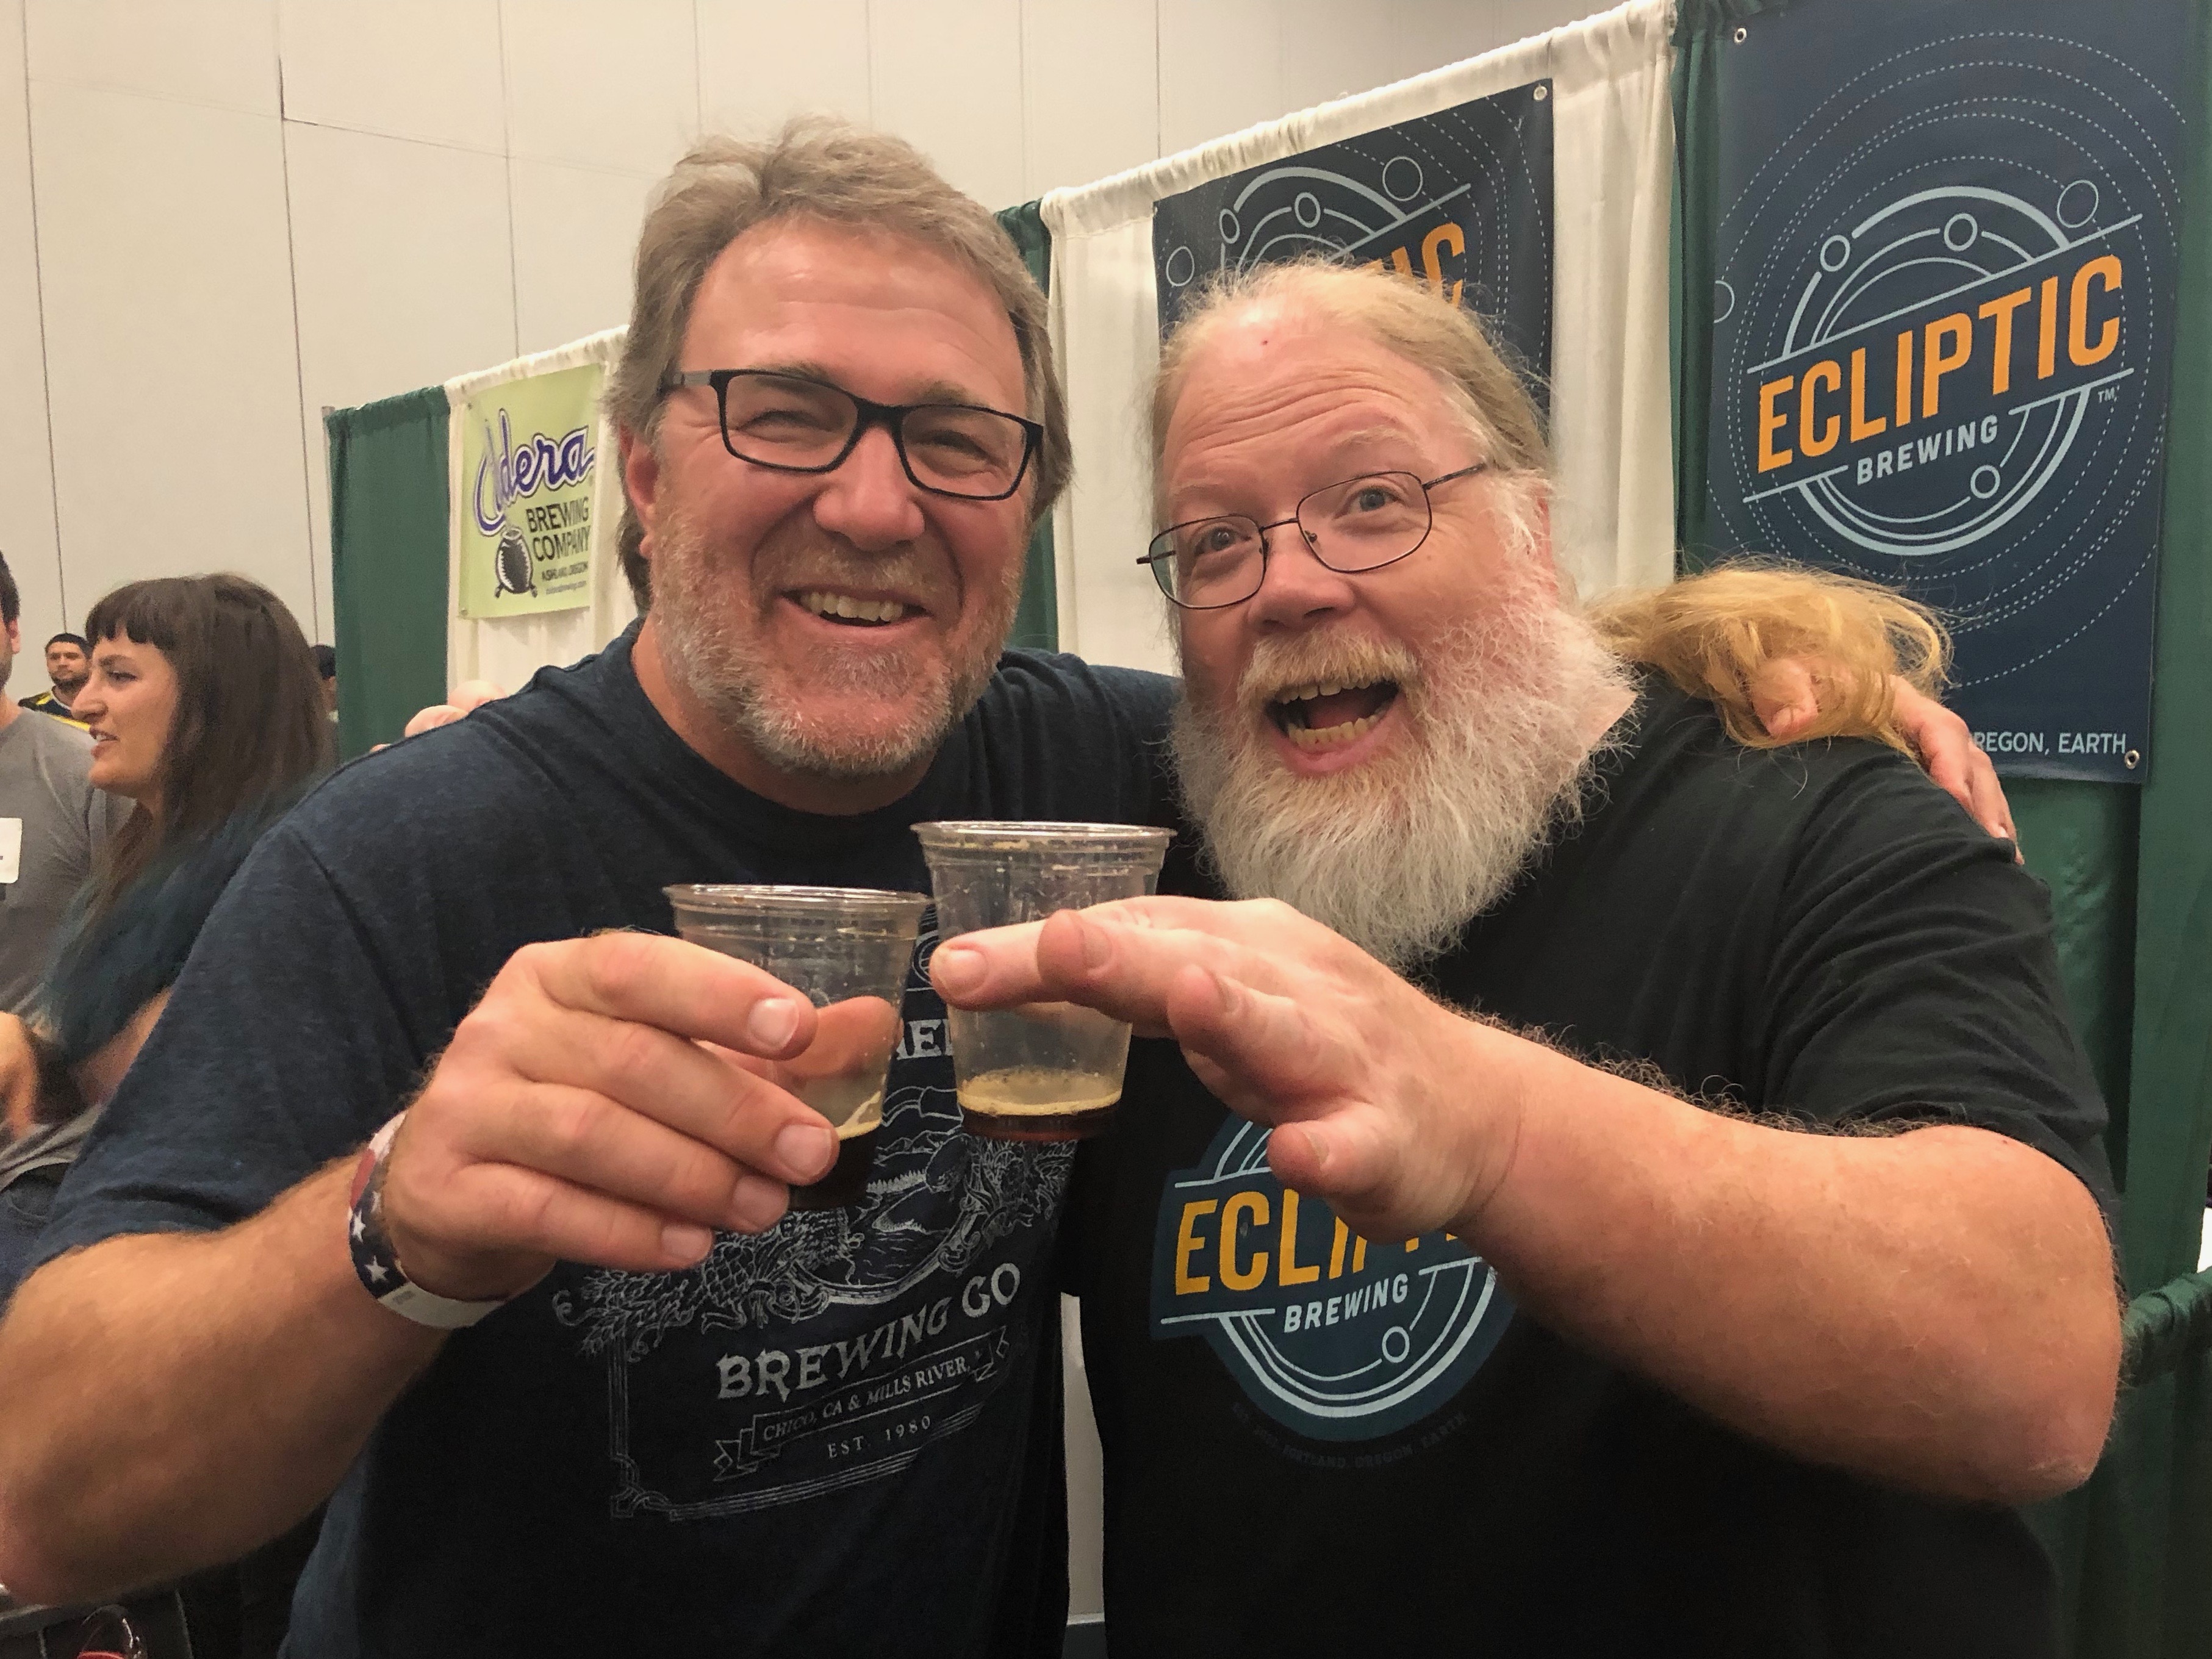 Terence Sullivan from Sierra Nevada and John Harris from Ecliptic Brewing during the Homebrew Con 2018 Kickoff Party.